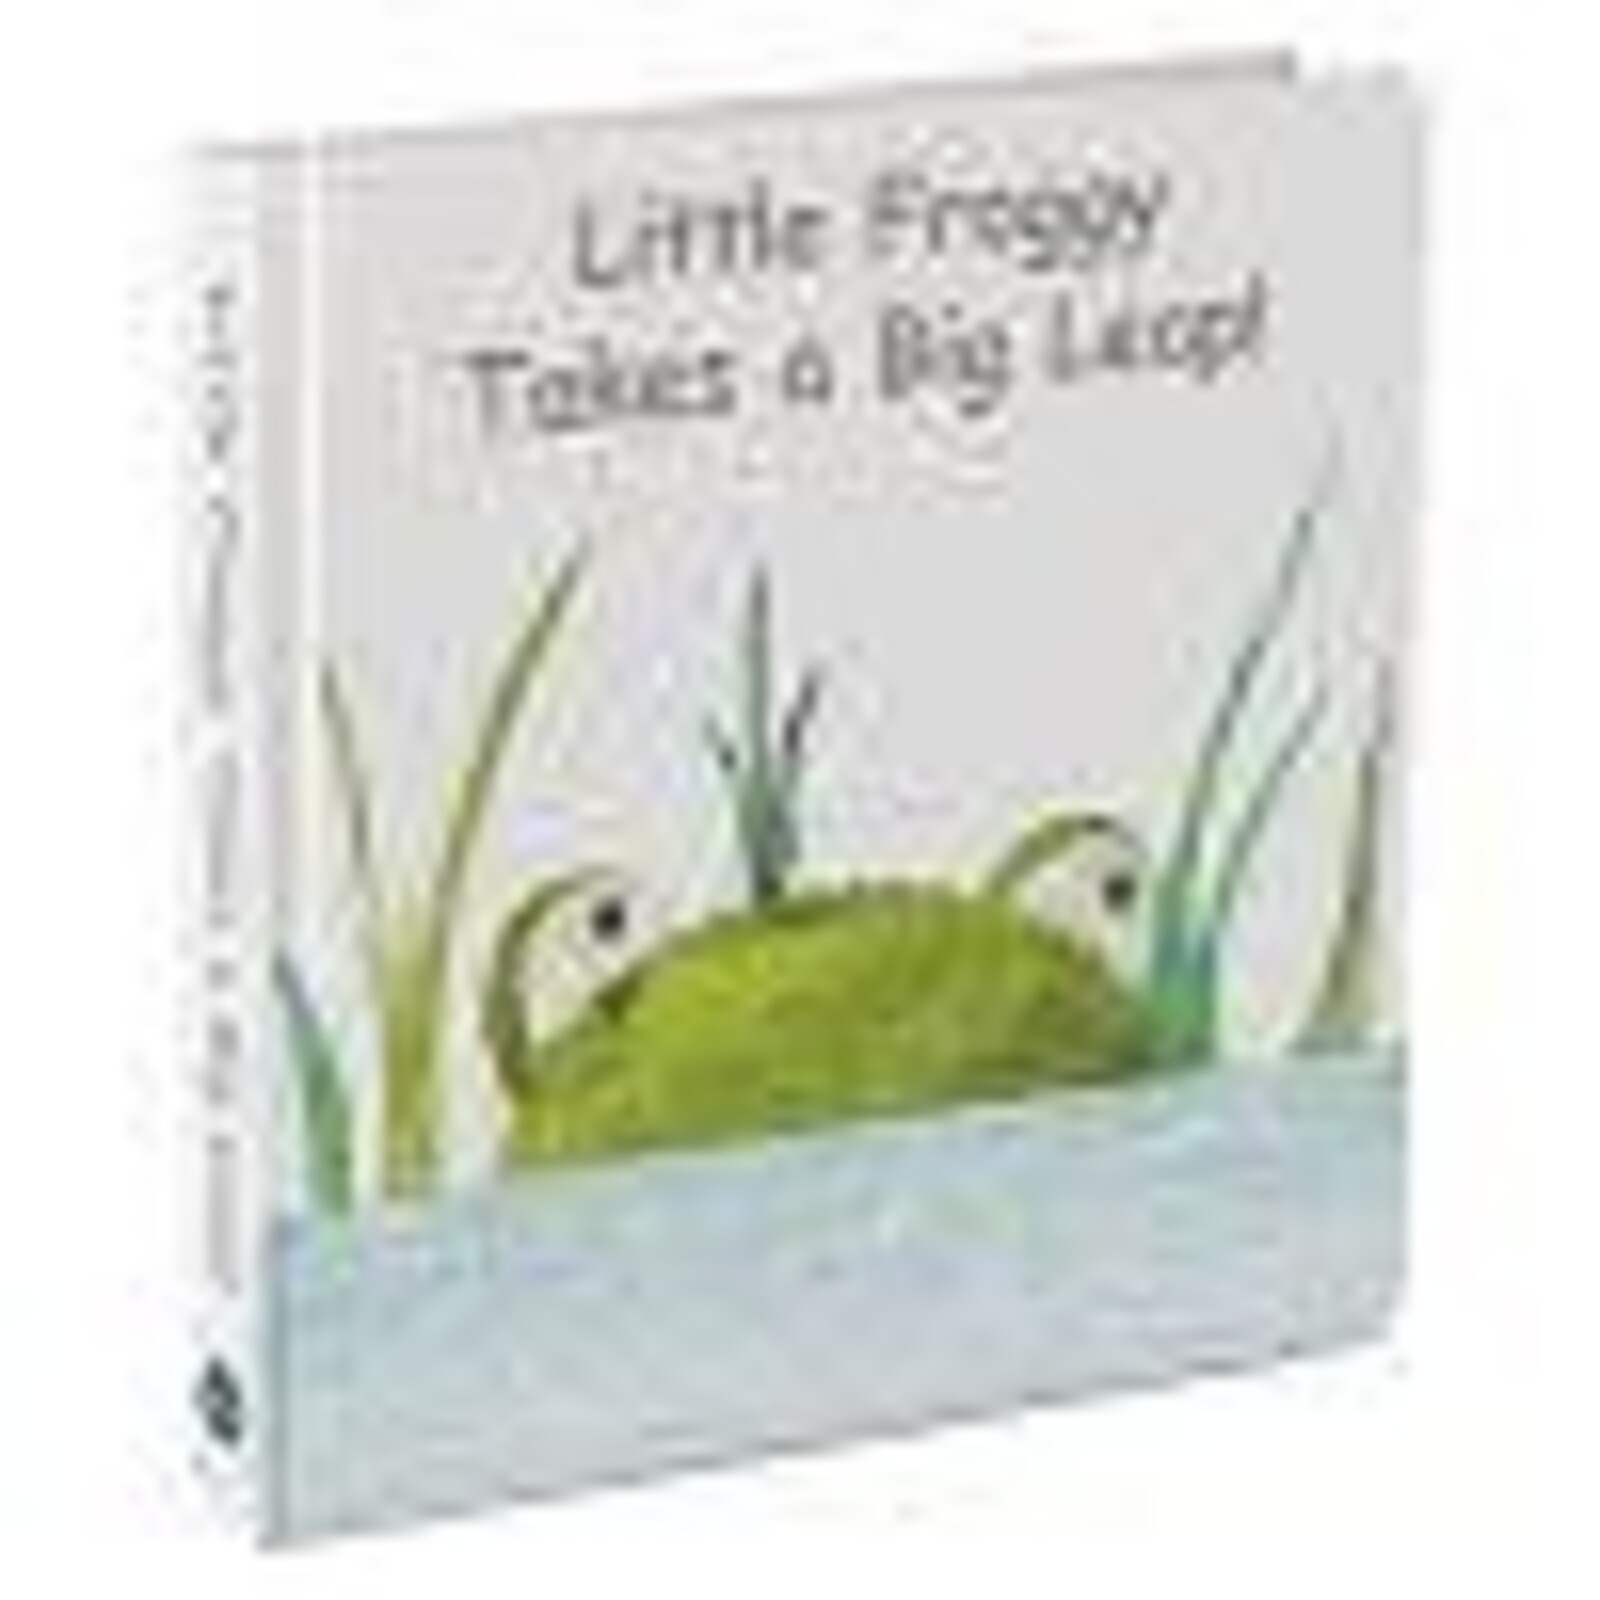 Mary Meyer “Little Froggy Takes a Big Leap!” Board Book – 8×8″ #27400 loading=